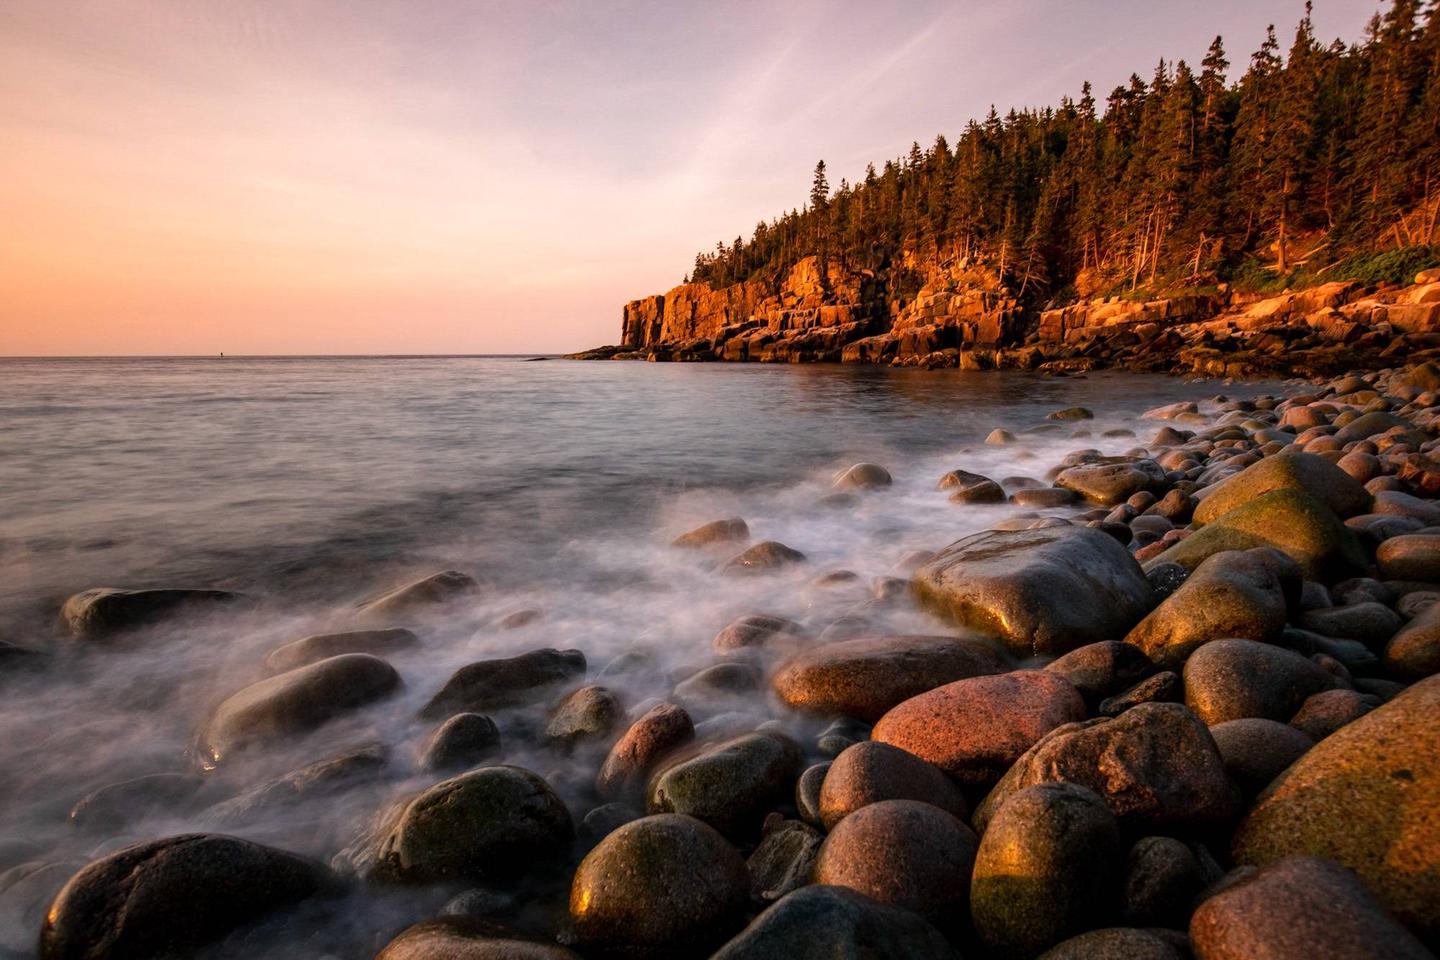 Acadia National Park’s Otter Cliffs climbing area in the distance at sunrise.